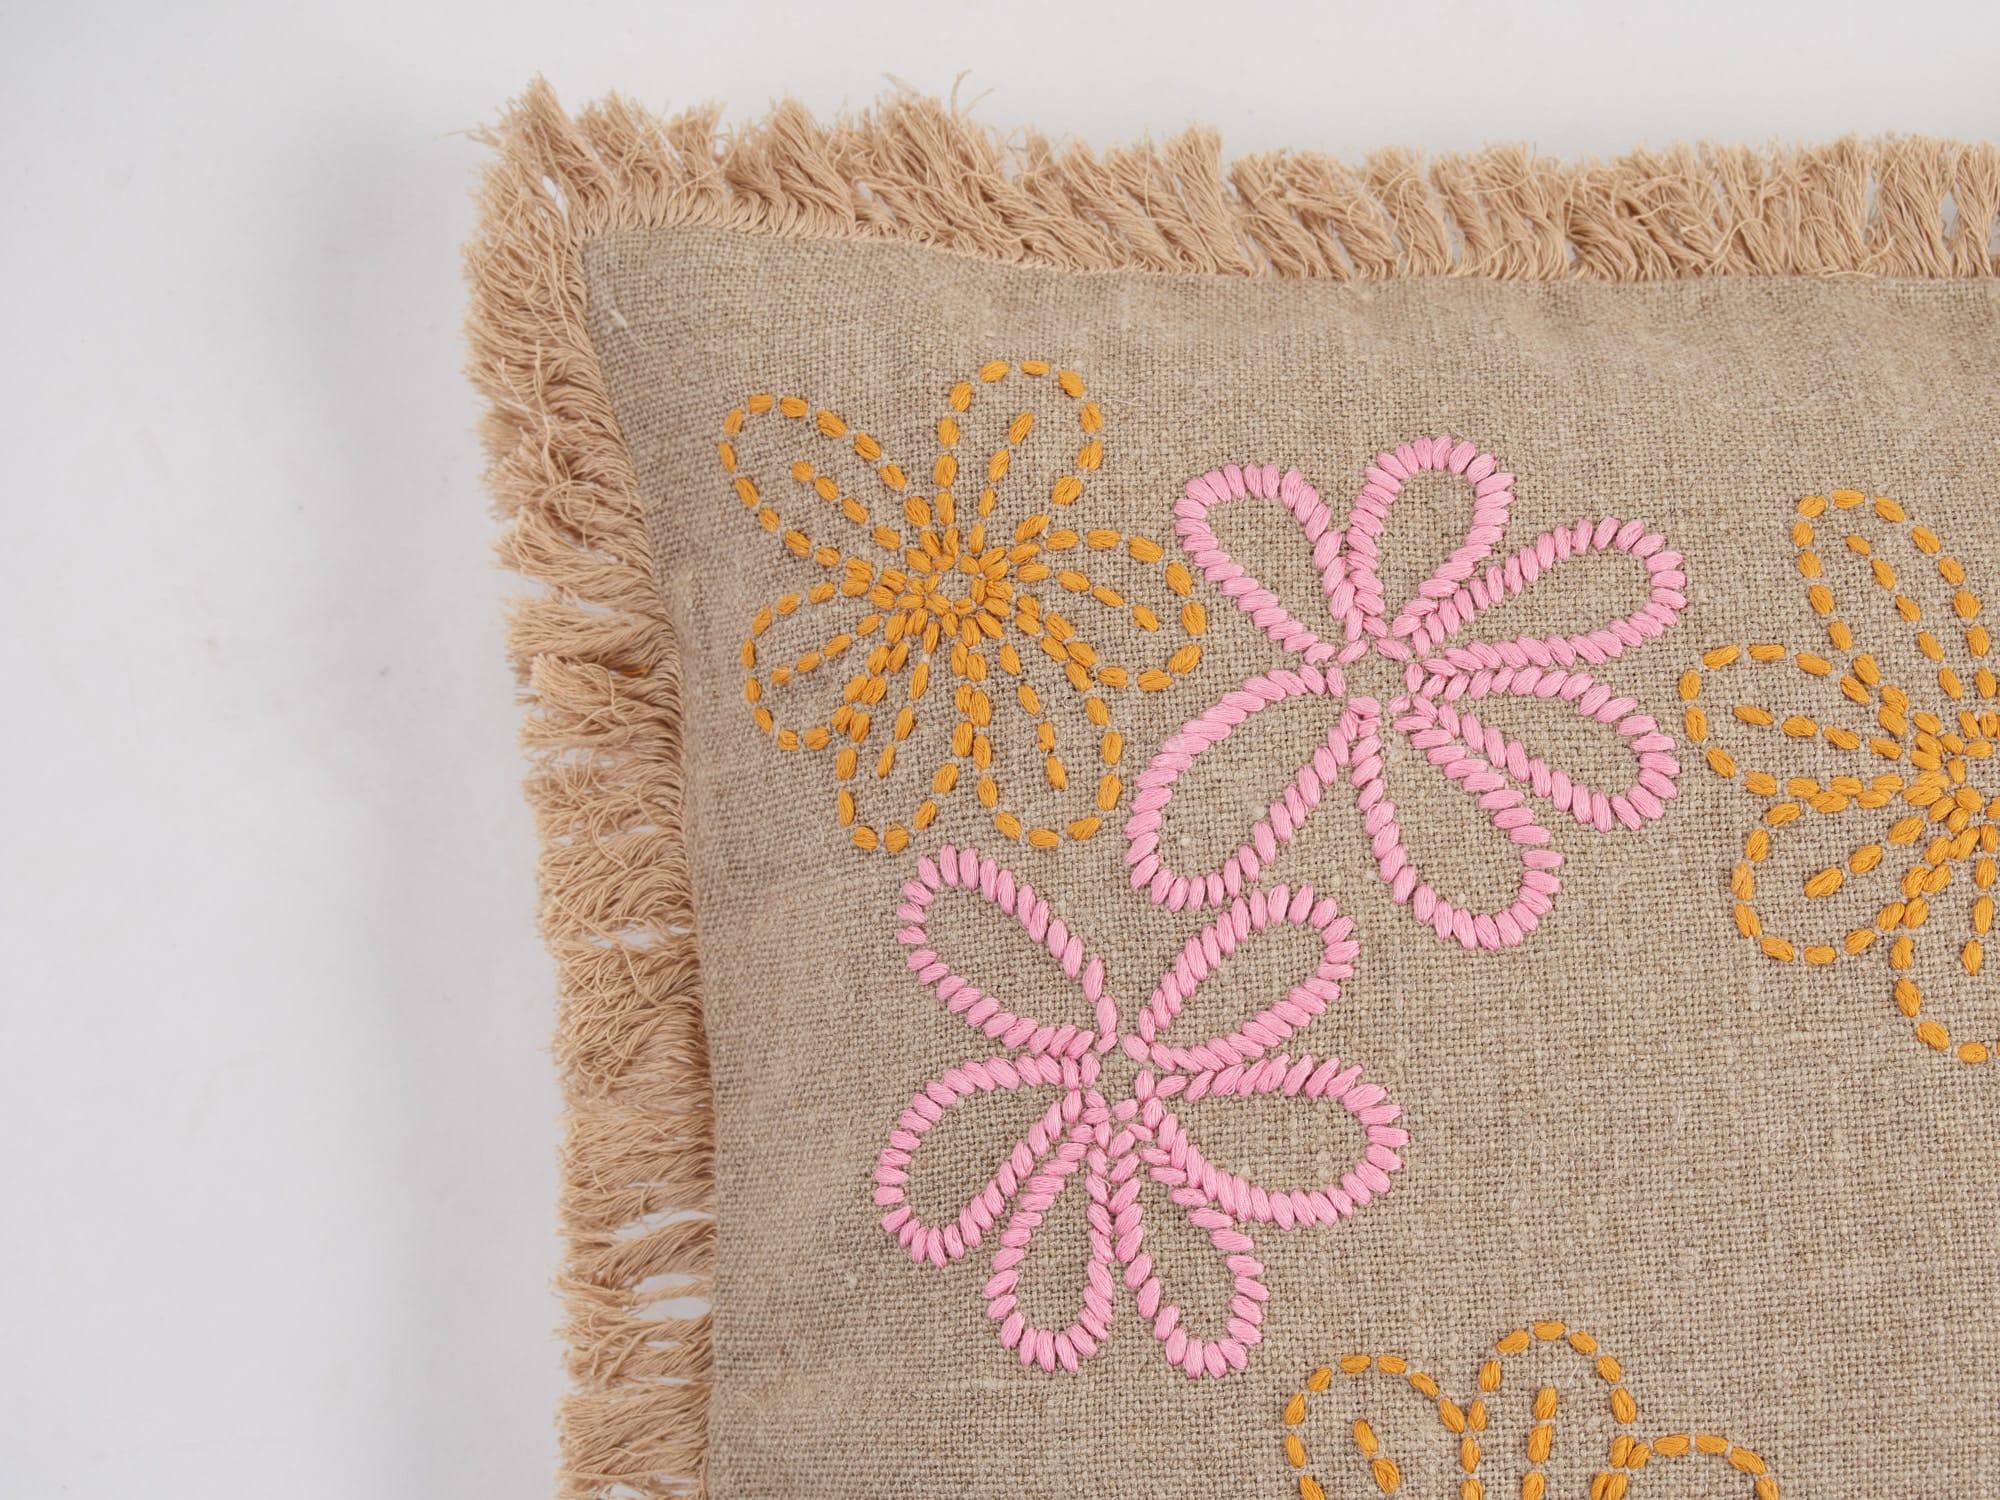 The pink and orange flowers are entirely embroidered by hand on high quality natural linen. A cushion like this, can transform instantly a space.
Standard size 50 x 50 cm. Customisable in other sizes and/or colour combinations on request.

Based